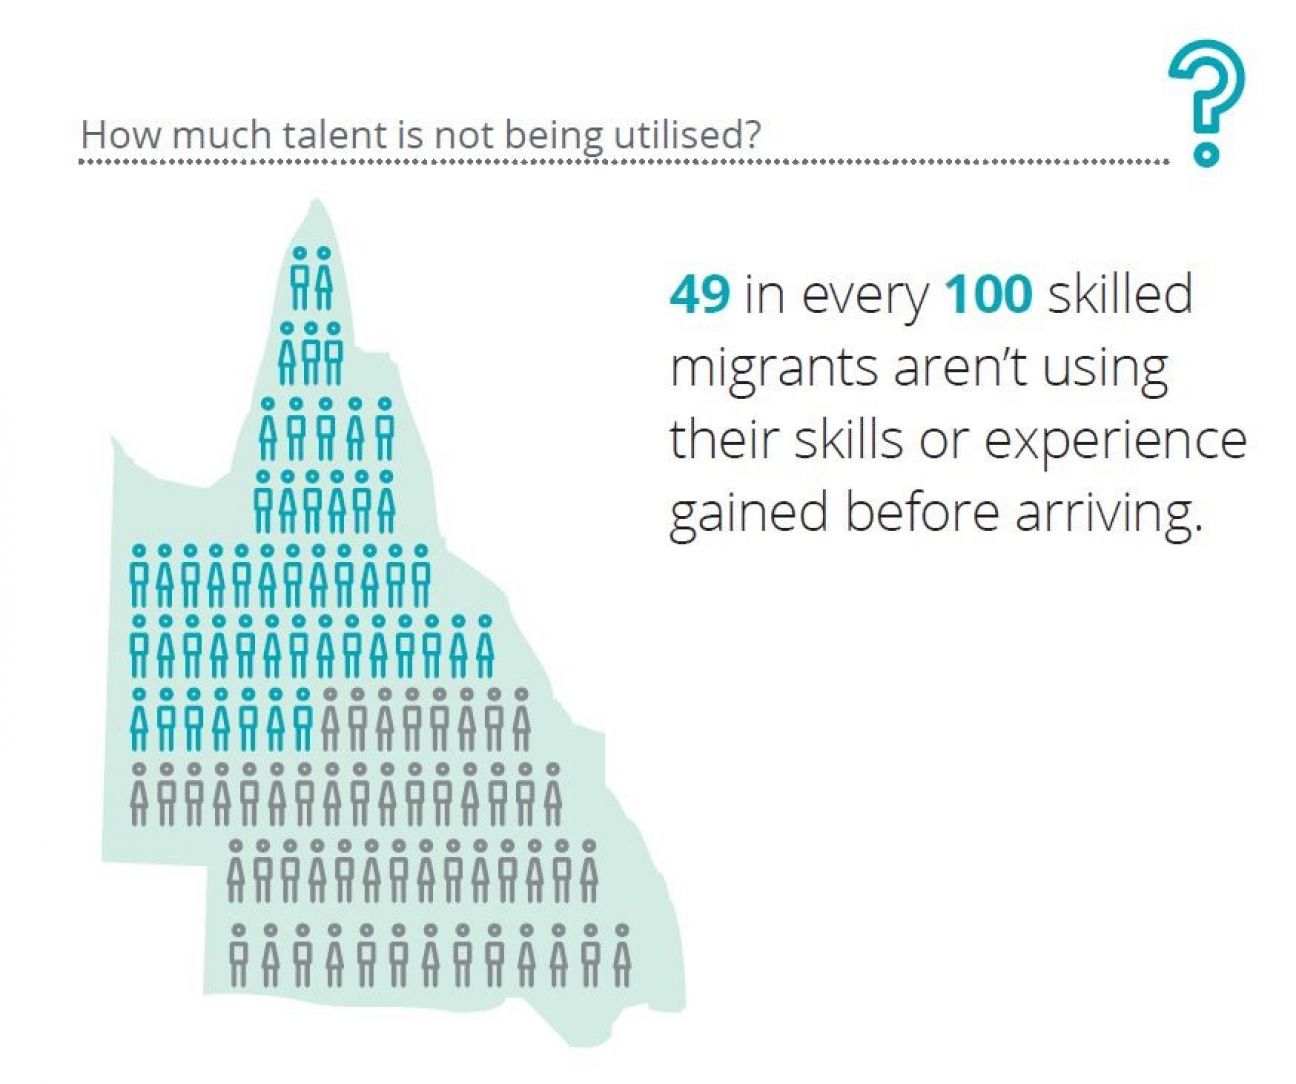 Info graphic: How much talent is underutilised? 49 in every 100 skilled migrants aren't using their skills or experience gained before arriving.